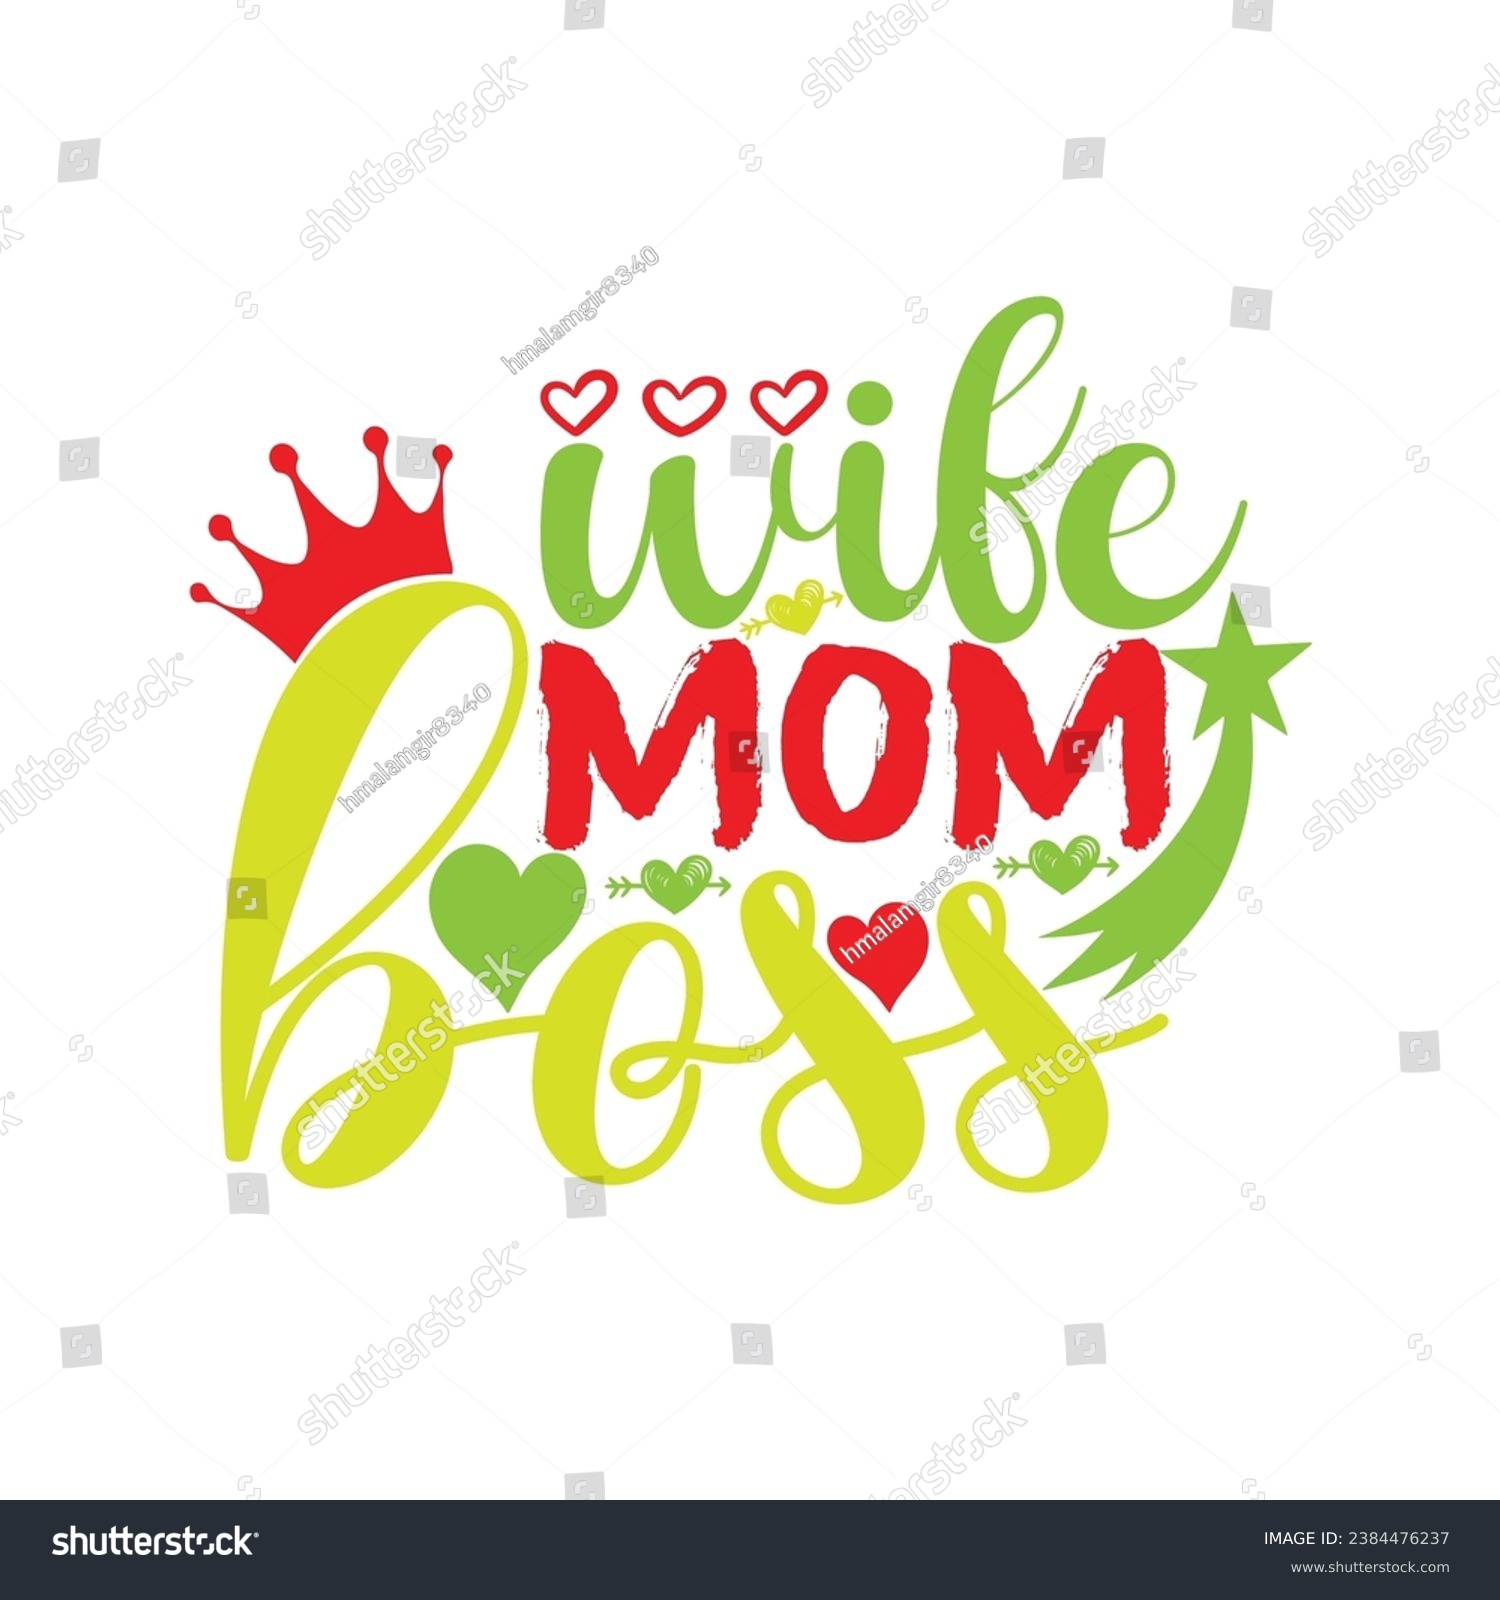 SVG of Wife mom boss t-shirt design. Here You Can find and Buy t-Shirt Design. Digital Files for yourself, friends and family, or anyone who supports your Special Day and Occasions. svg